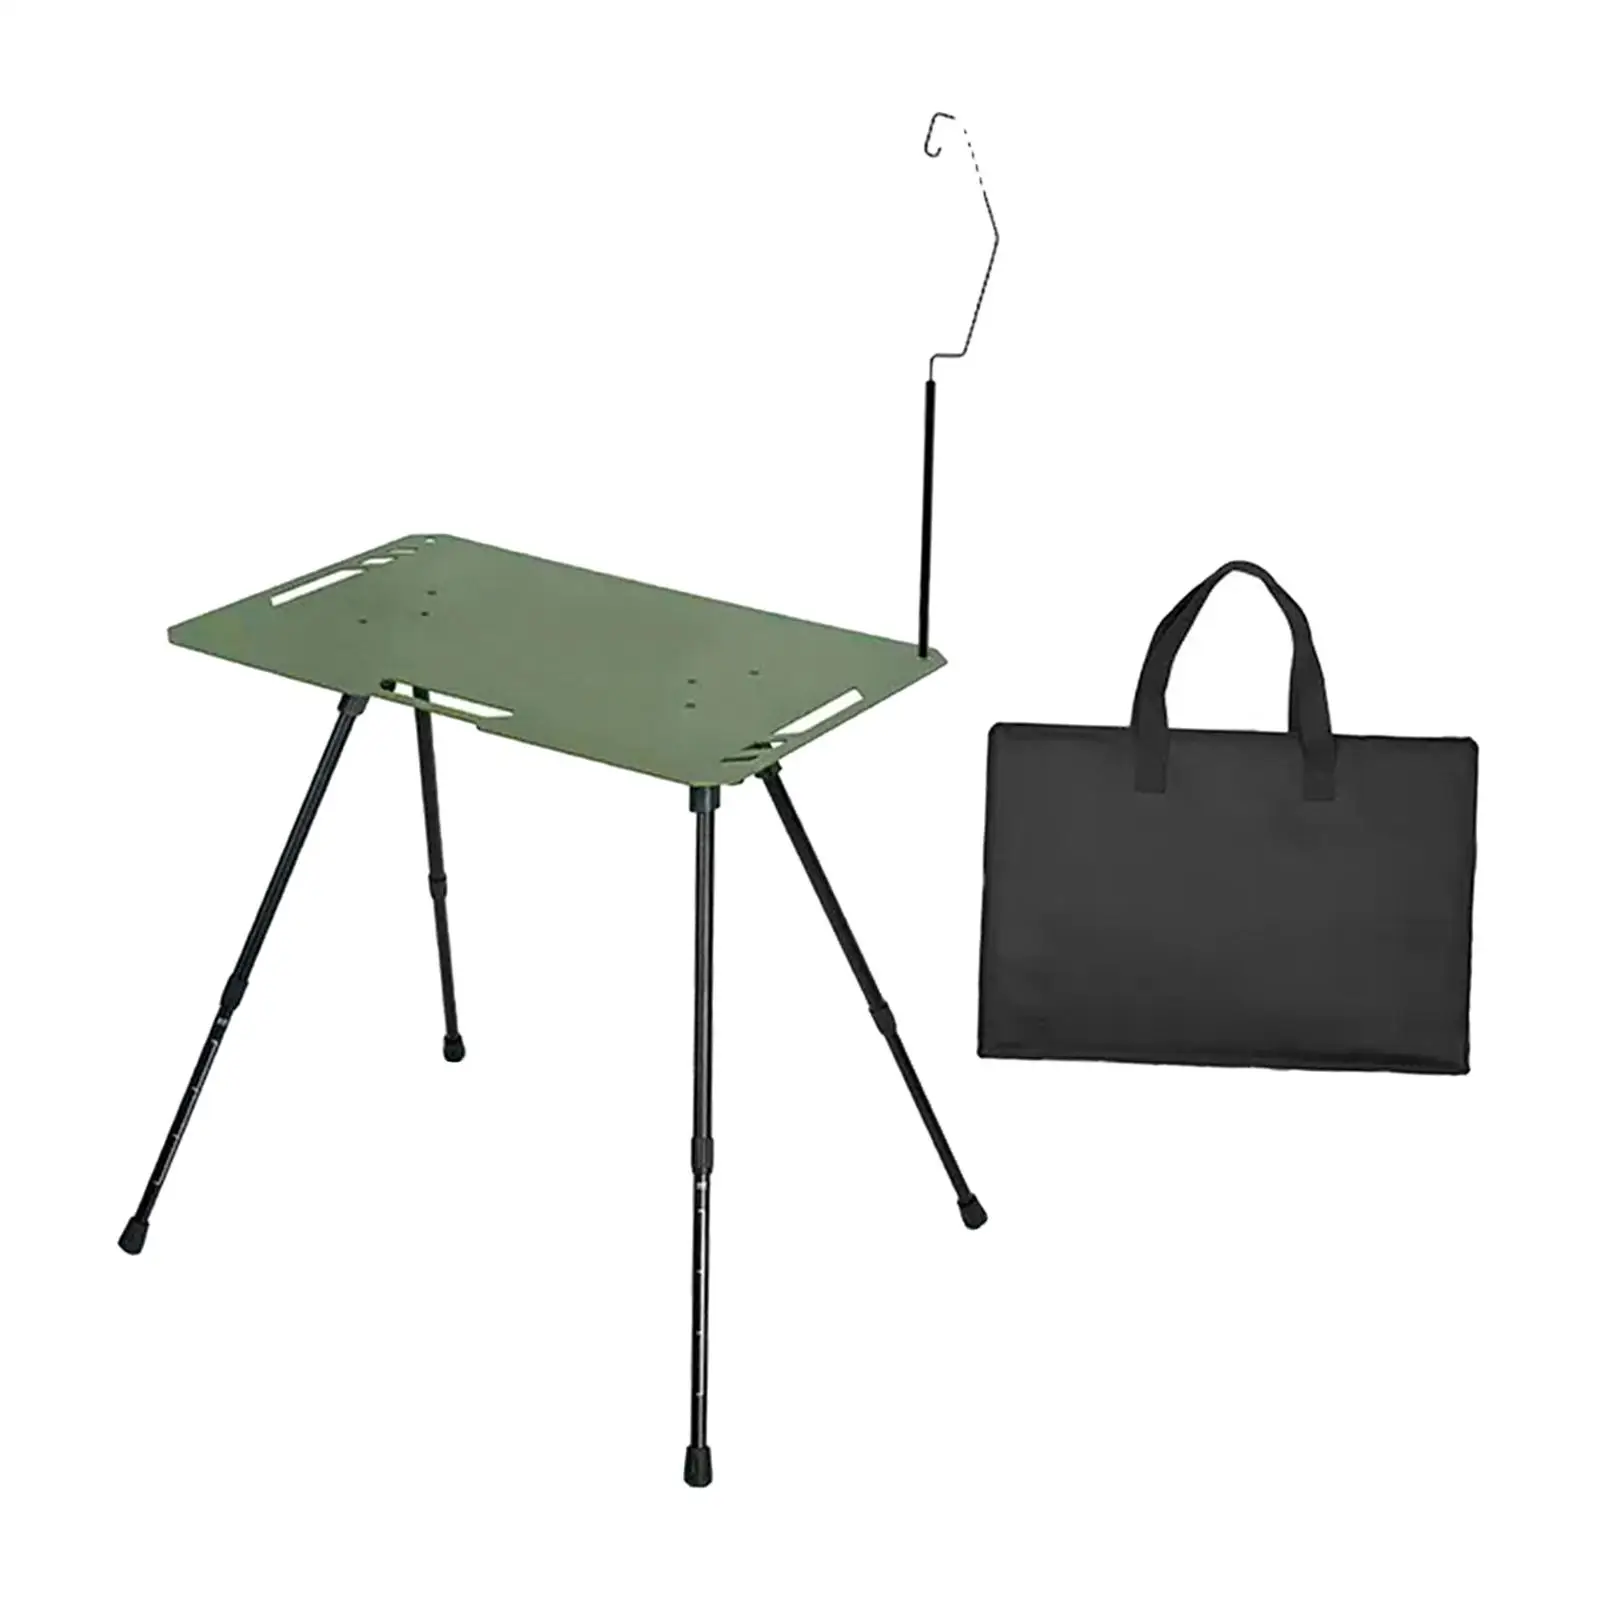 Camping Table Lightweight Load 30kg Retractable Outdoor Folding Table Side Table for Patio Camp Barbecue Travel Outdoor